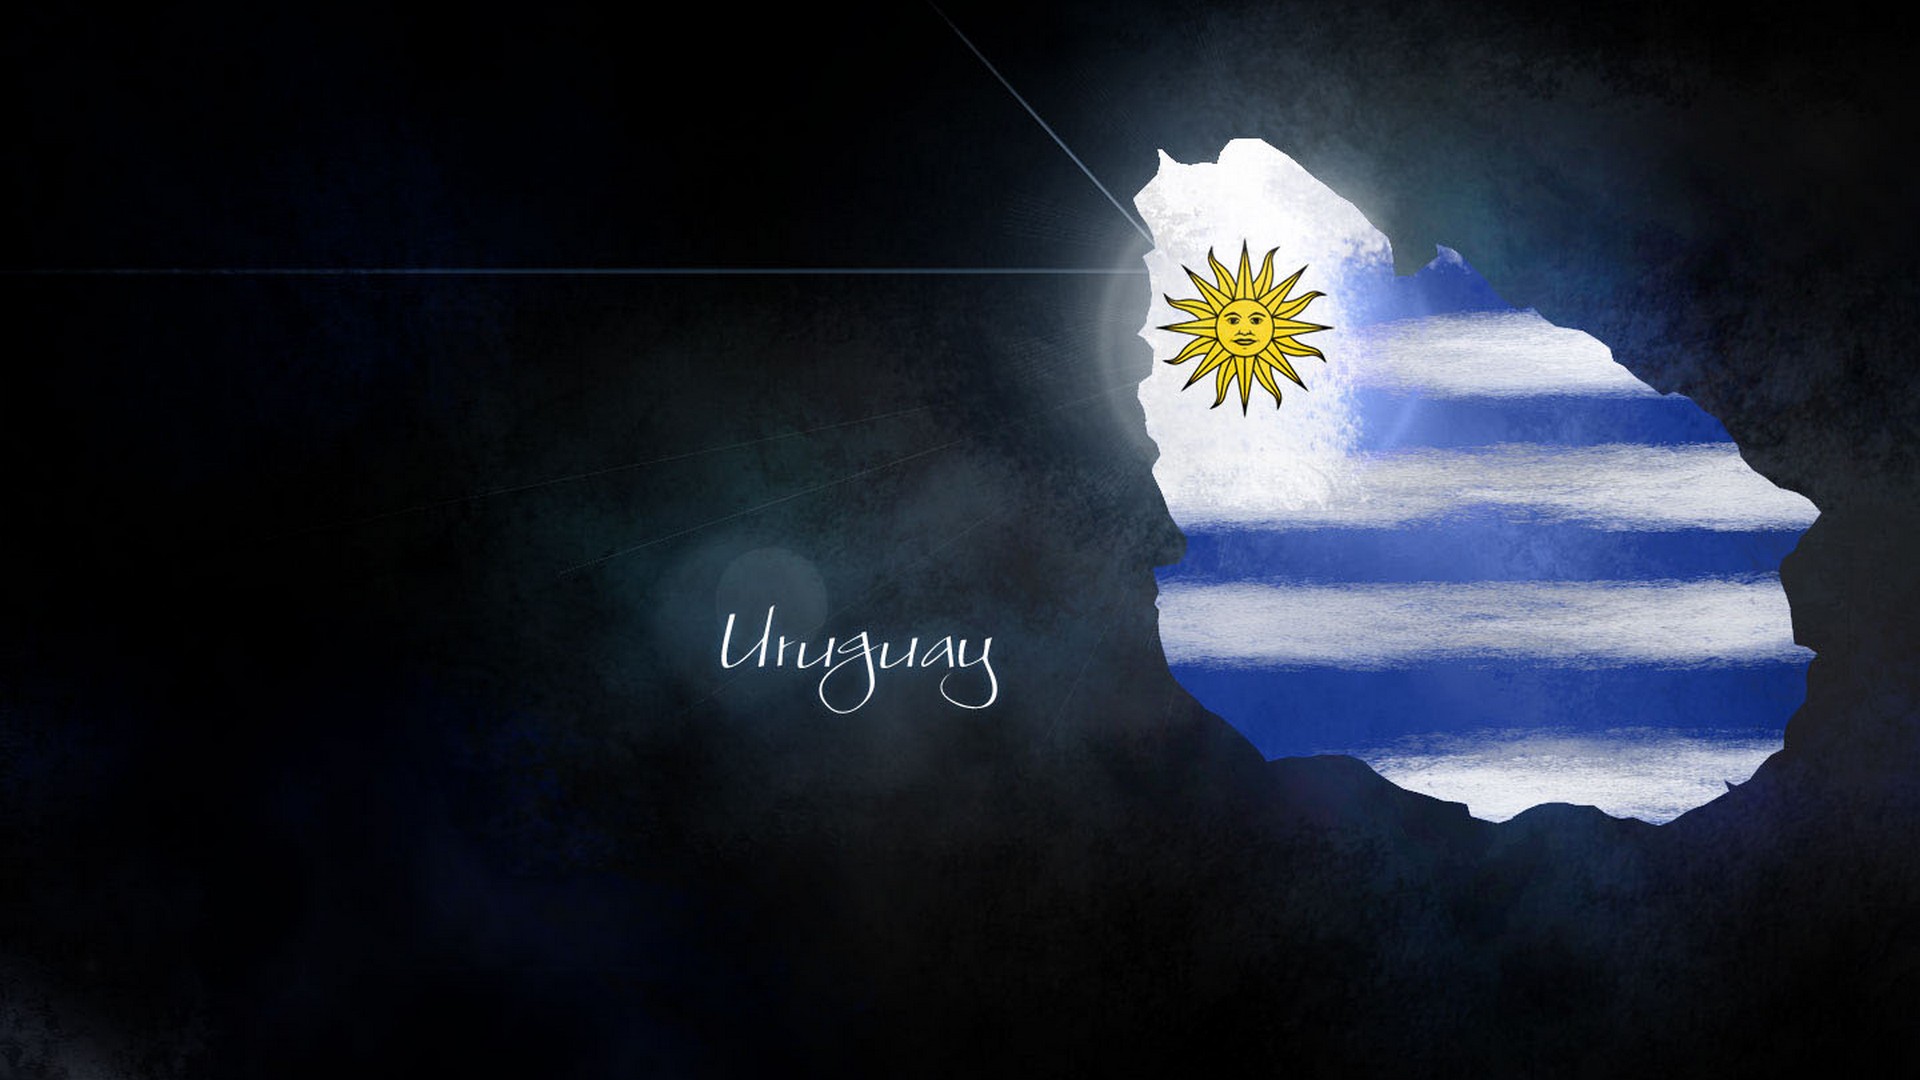 Desktop Wallpaper Uruguay National Team with resolution 1920X1080 pixel. You can use this wallpaper as background for your desktop Computer Screensavers, Android or iPhone smartphones